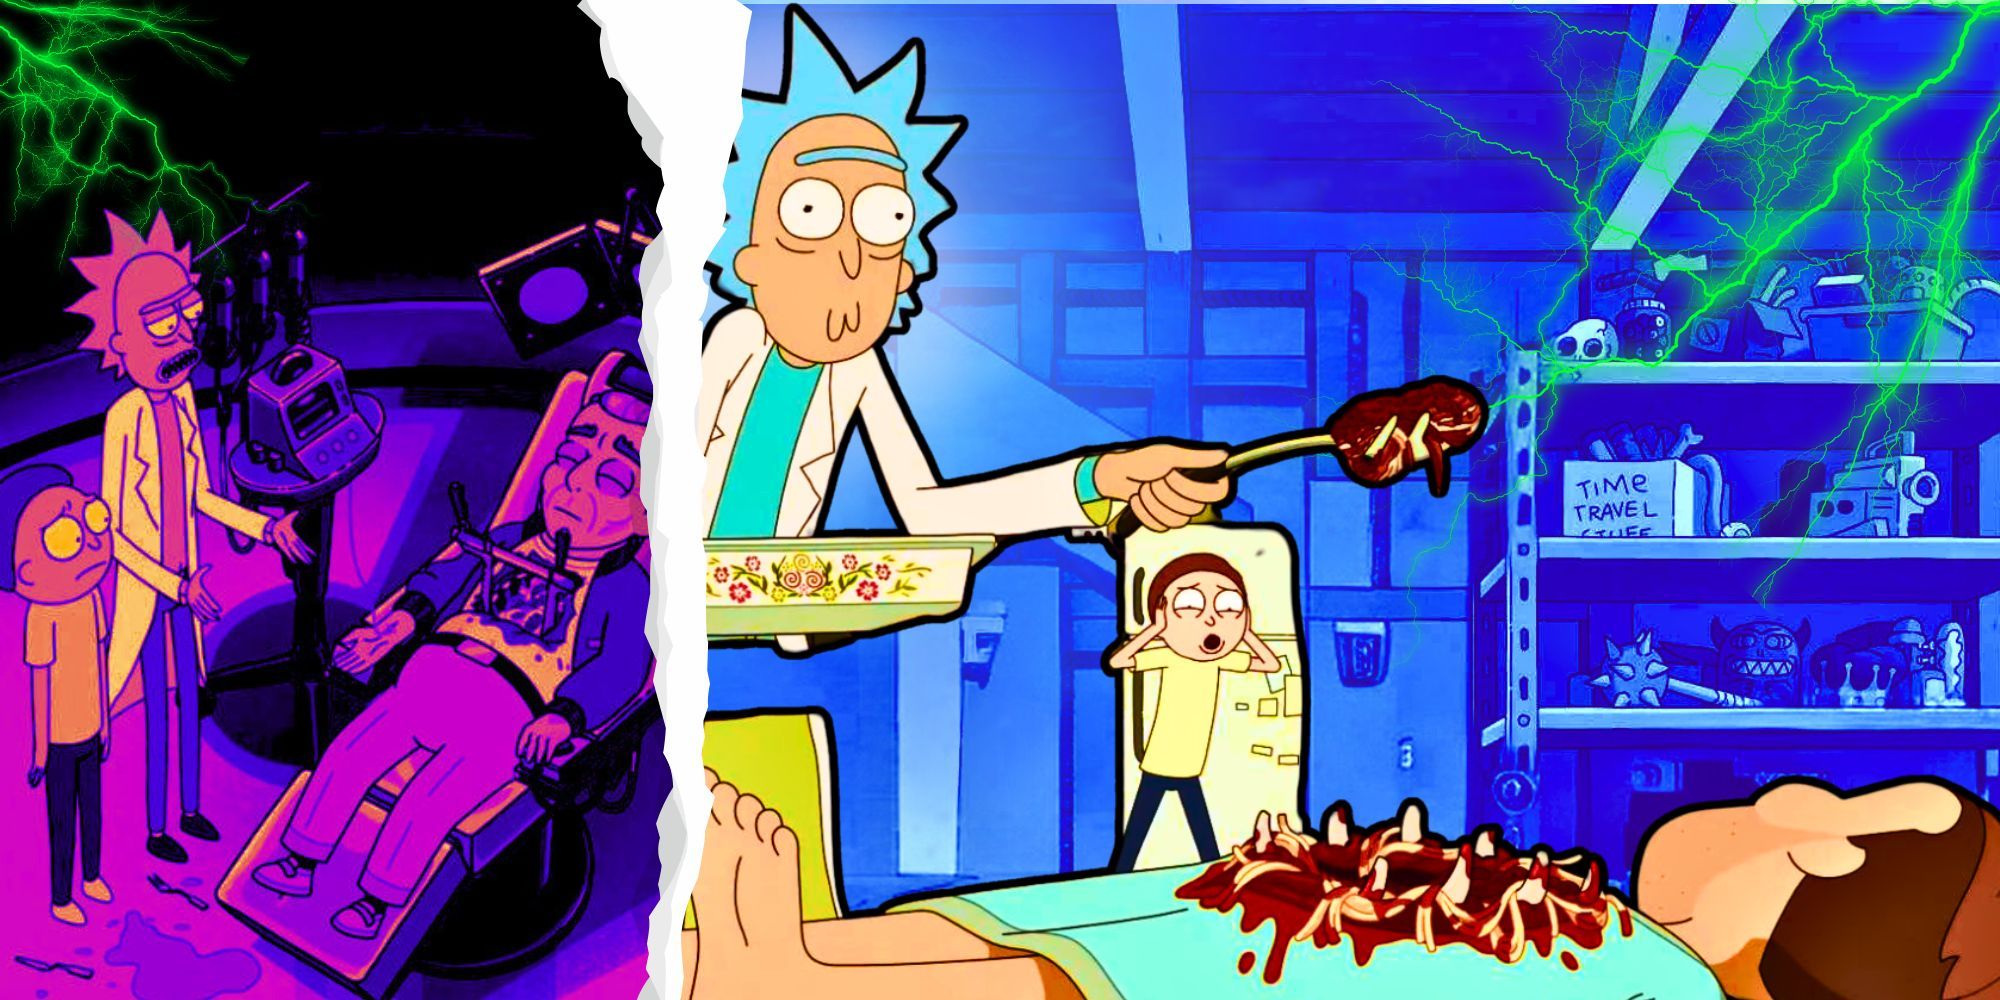 Rick And Morty Season 7s Funniest Episode Revived A Forgotten Trope That Made Season 1 Great